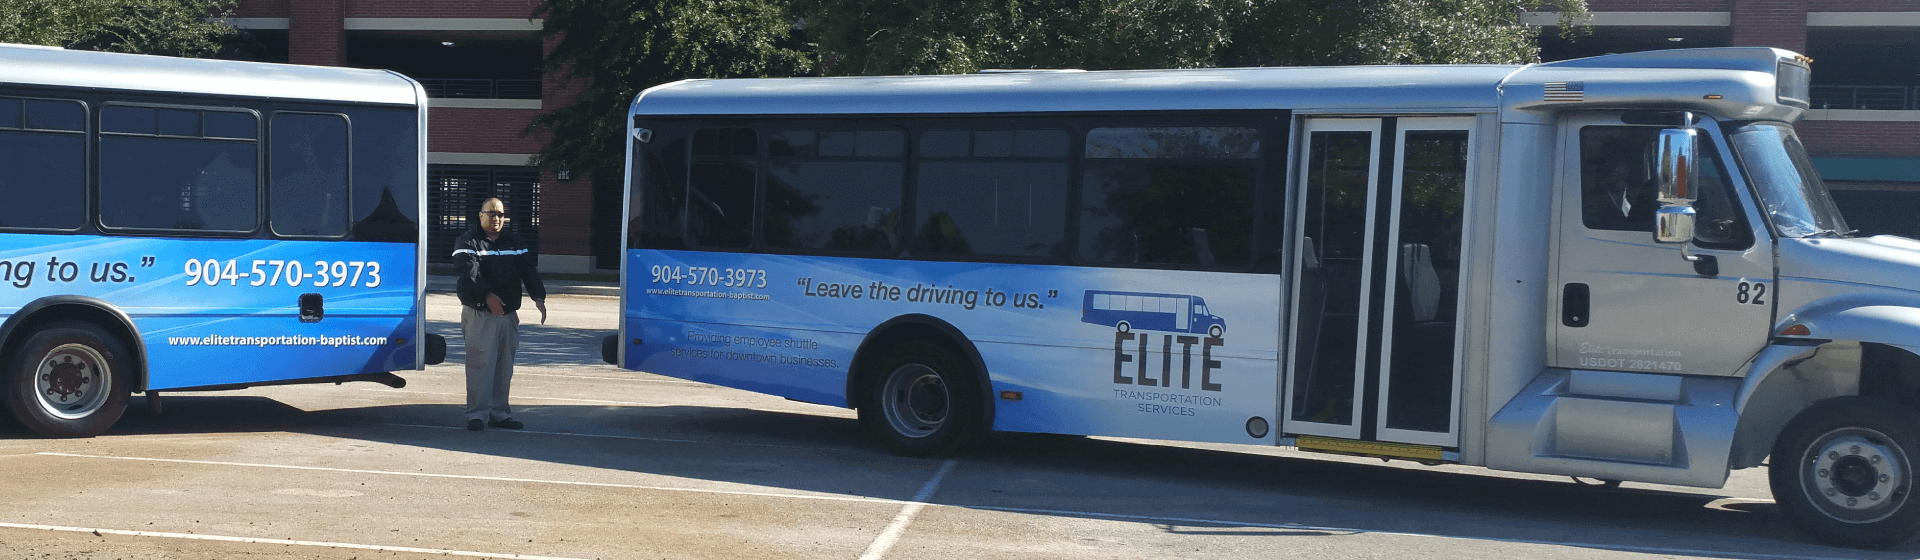 Image of Elite Parking service with vehicle